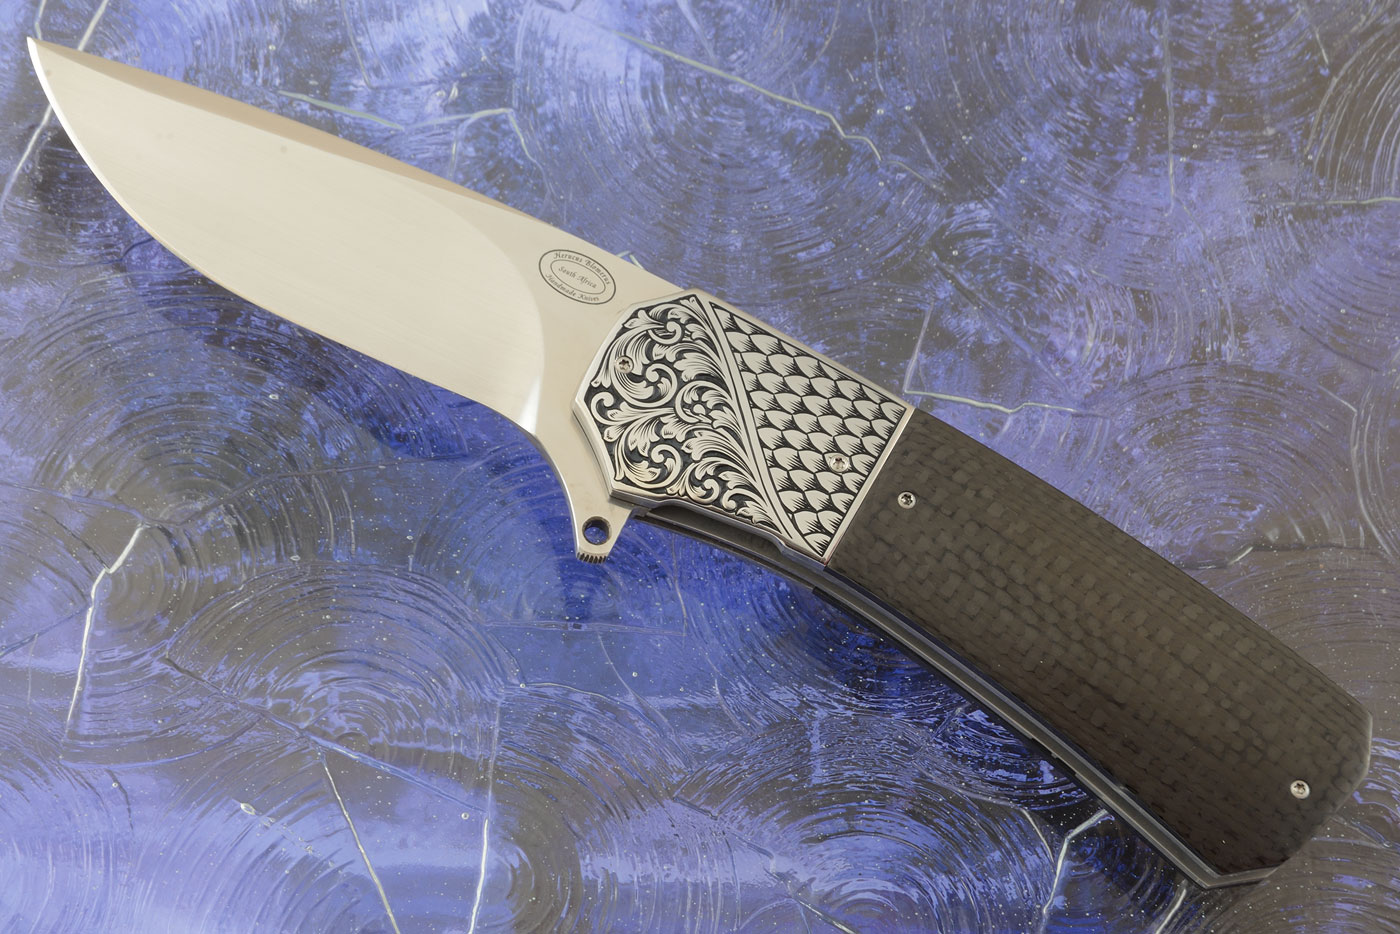 LL15 Flipper with Carbon Fiber and Engraved Bolsters (Ceramic IKBS)